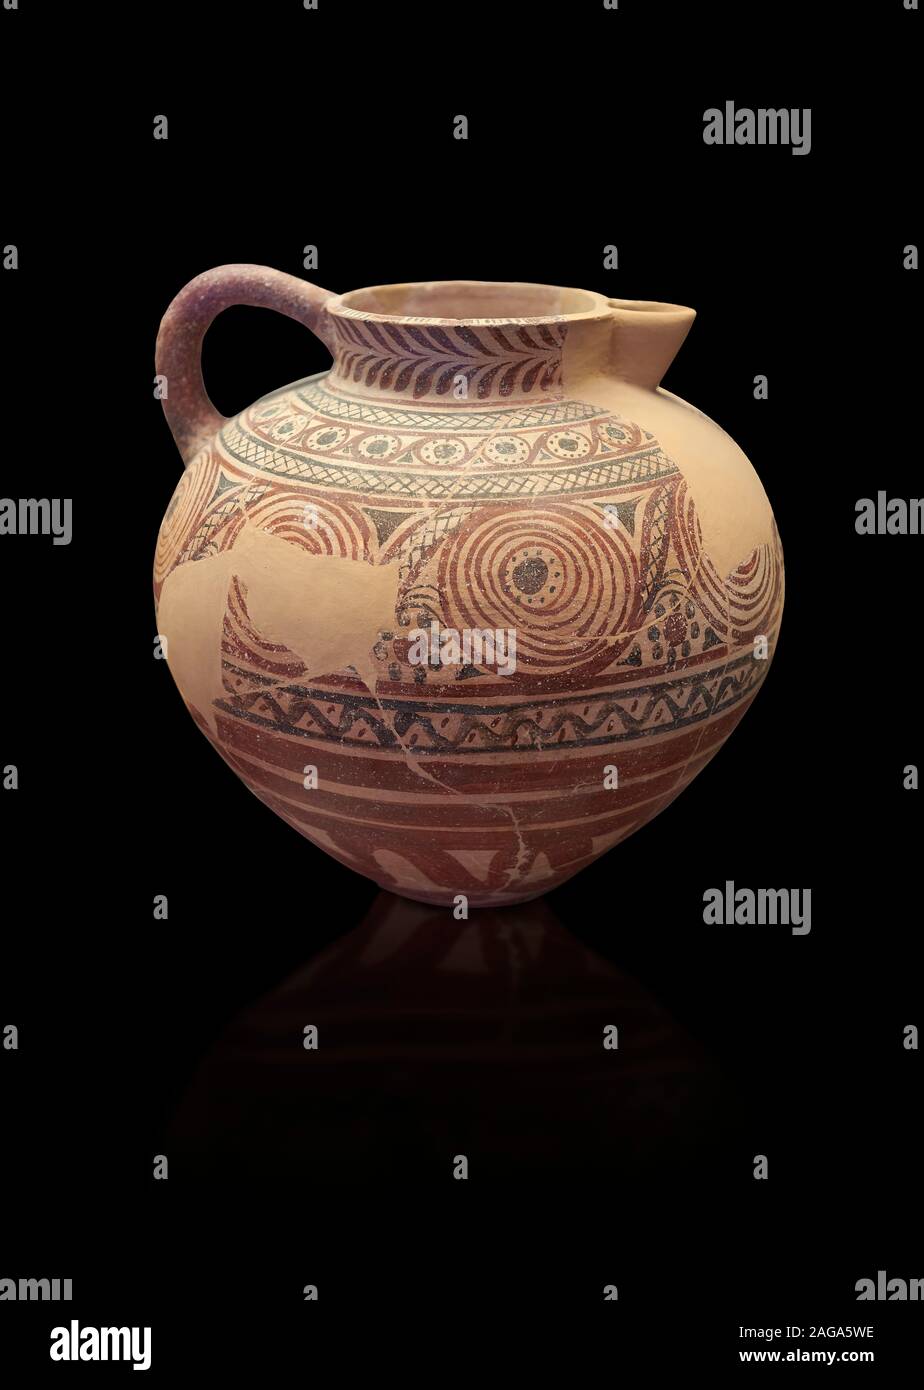 Spherical jug spiral and floral decorated. Early Cycladic I (1650-1550 BC); Phylakopi; Melos. National Archaeological Museum Athens. Cat No 5818. Blac Stock Photo